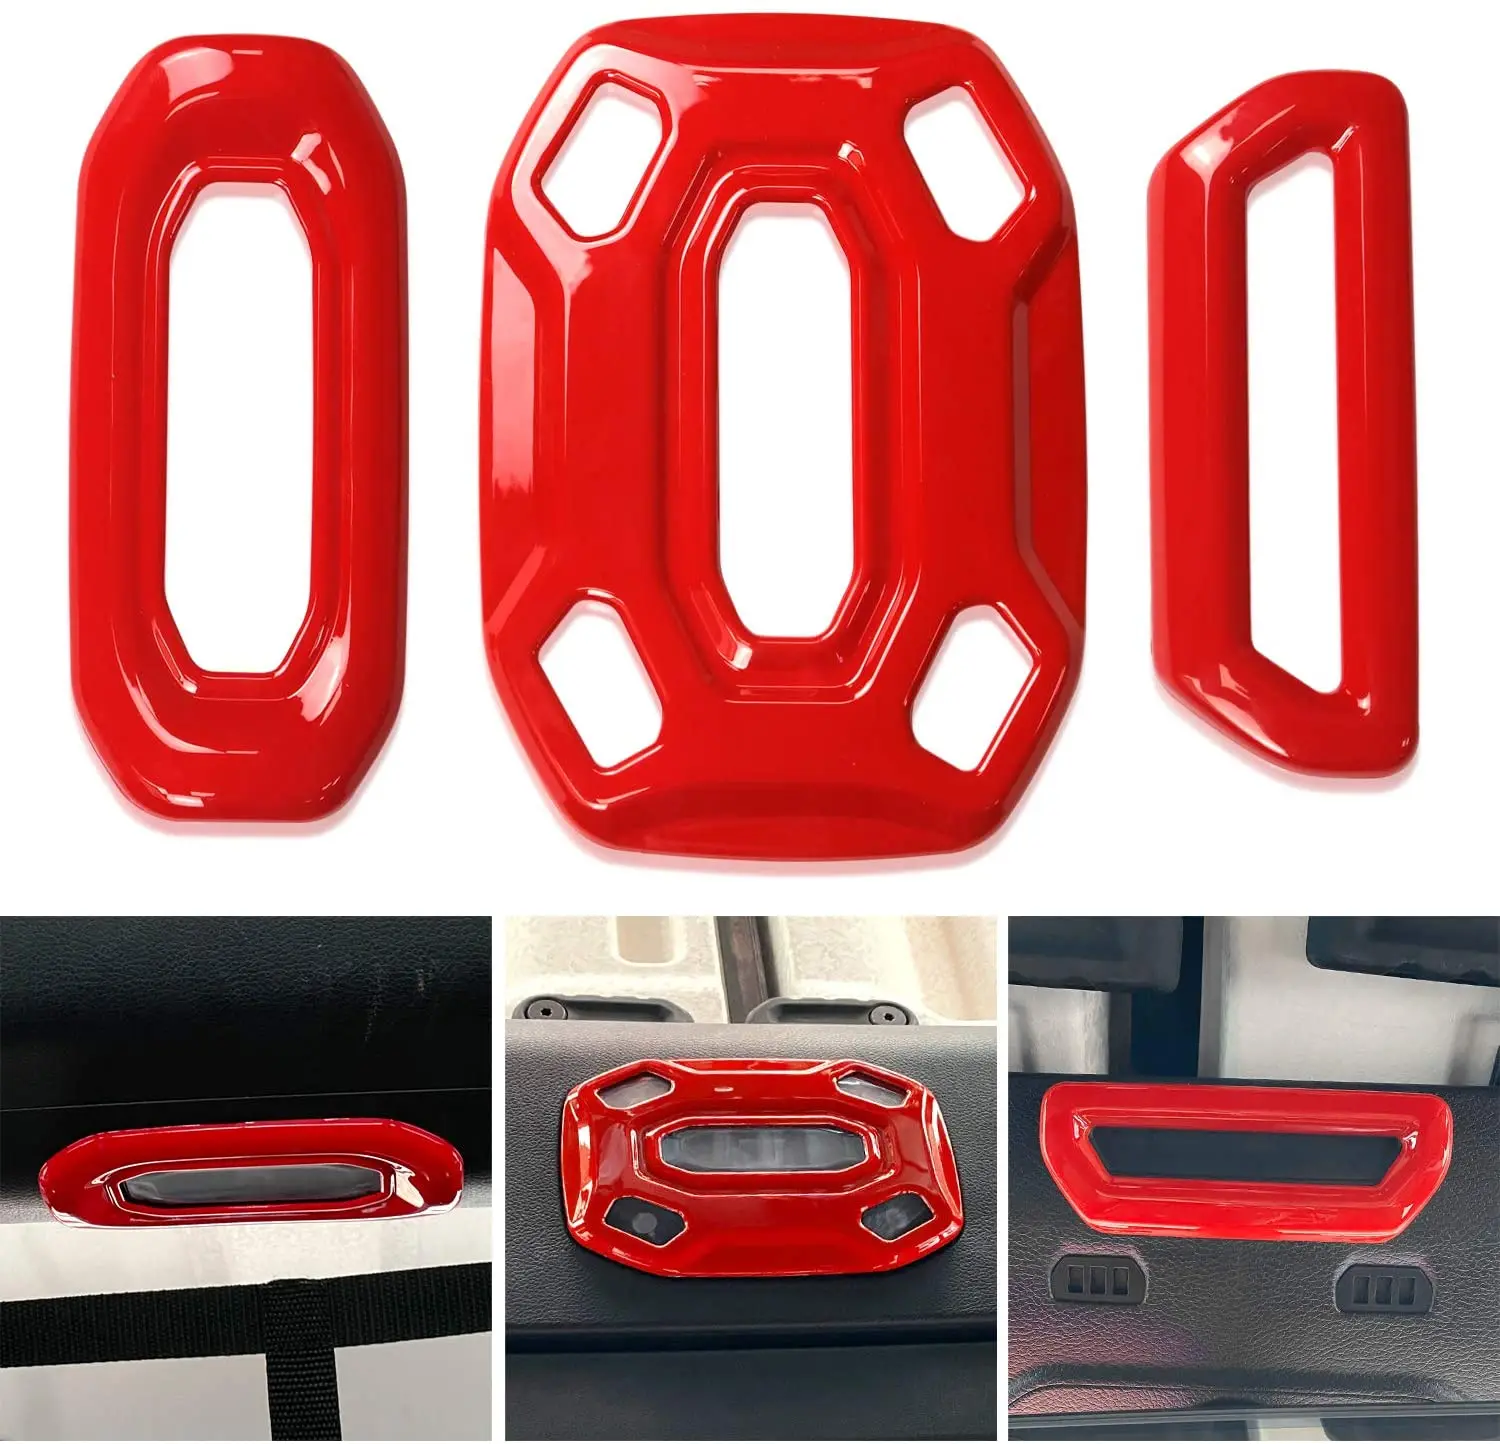 

Bolaxin Front Middle Rear Roof Reading Light Panel Decoration Cover Decor Trim Compatible For 2018-2021 Jeep Wrangler JL JLU Red